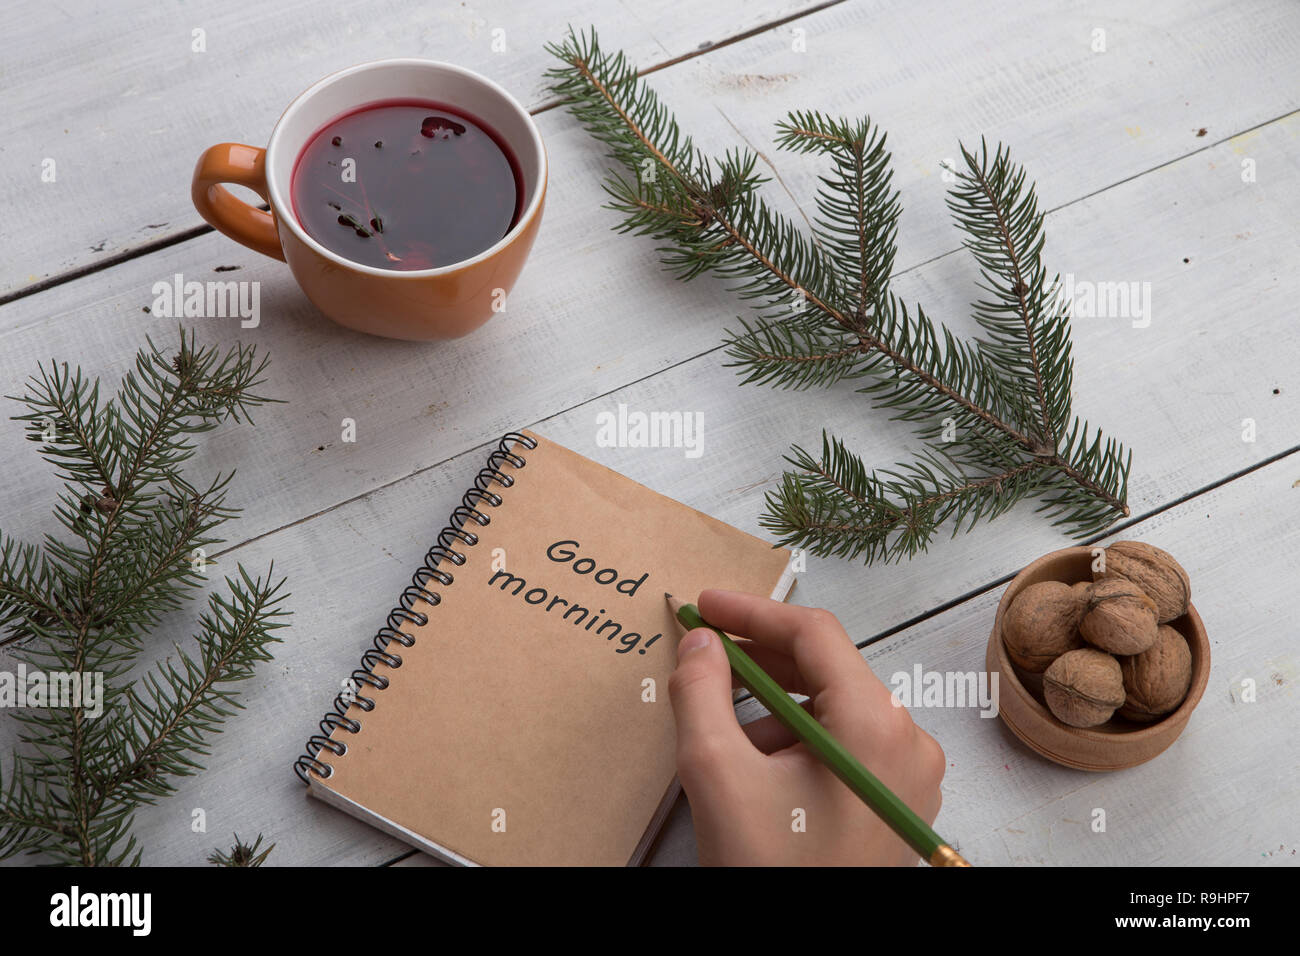 Winter holidays concept - notepad with text 